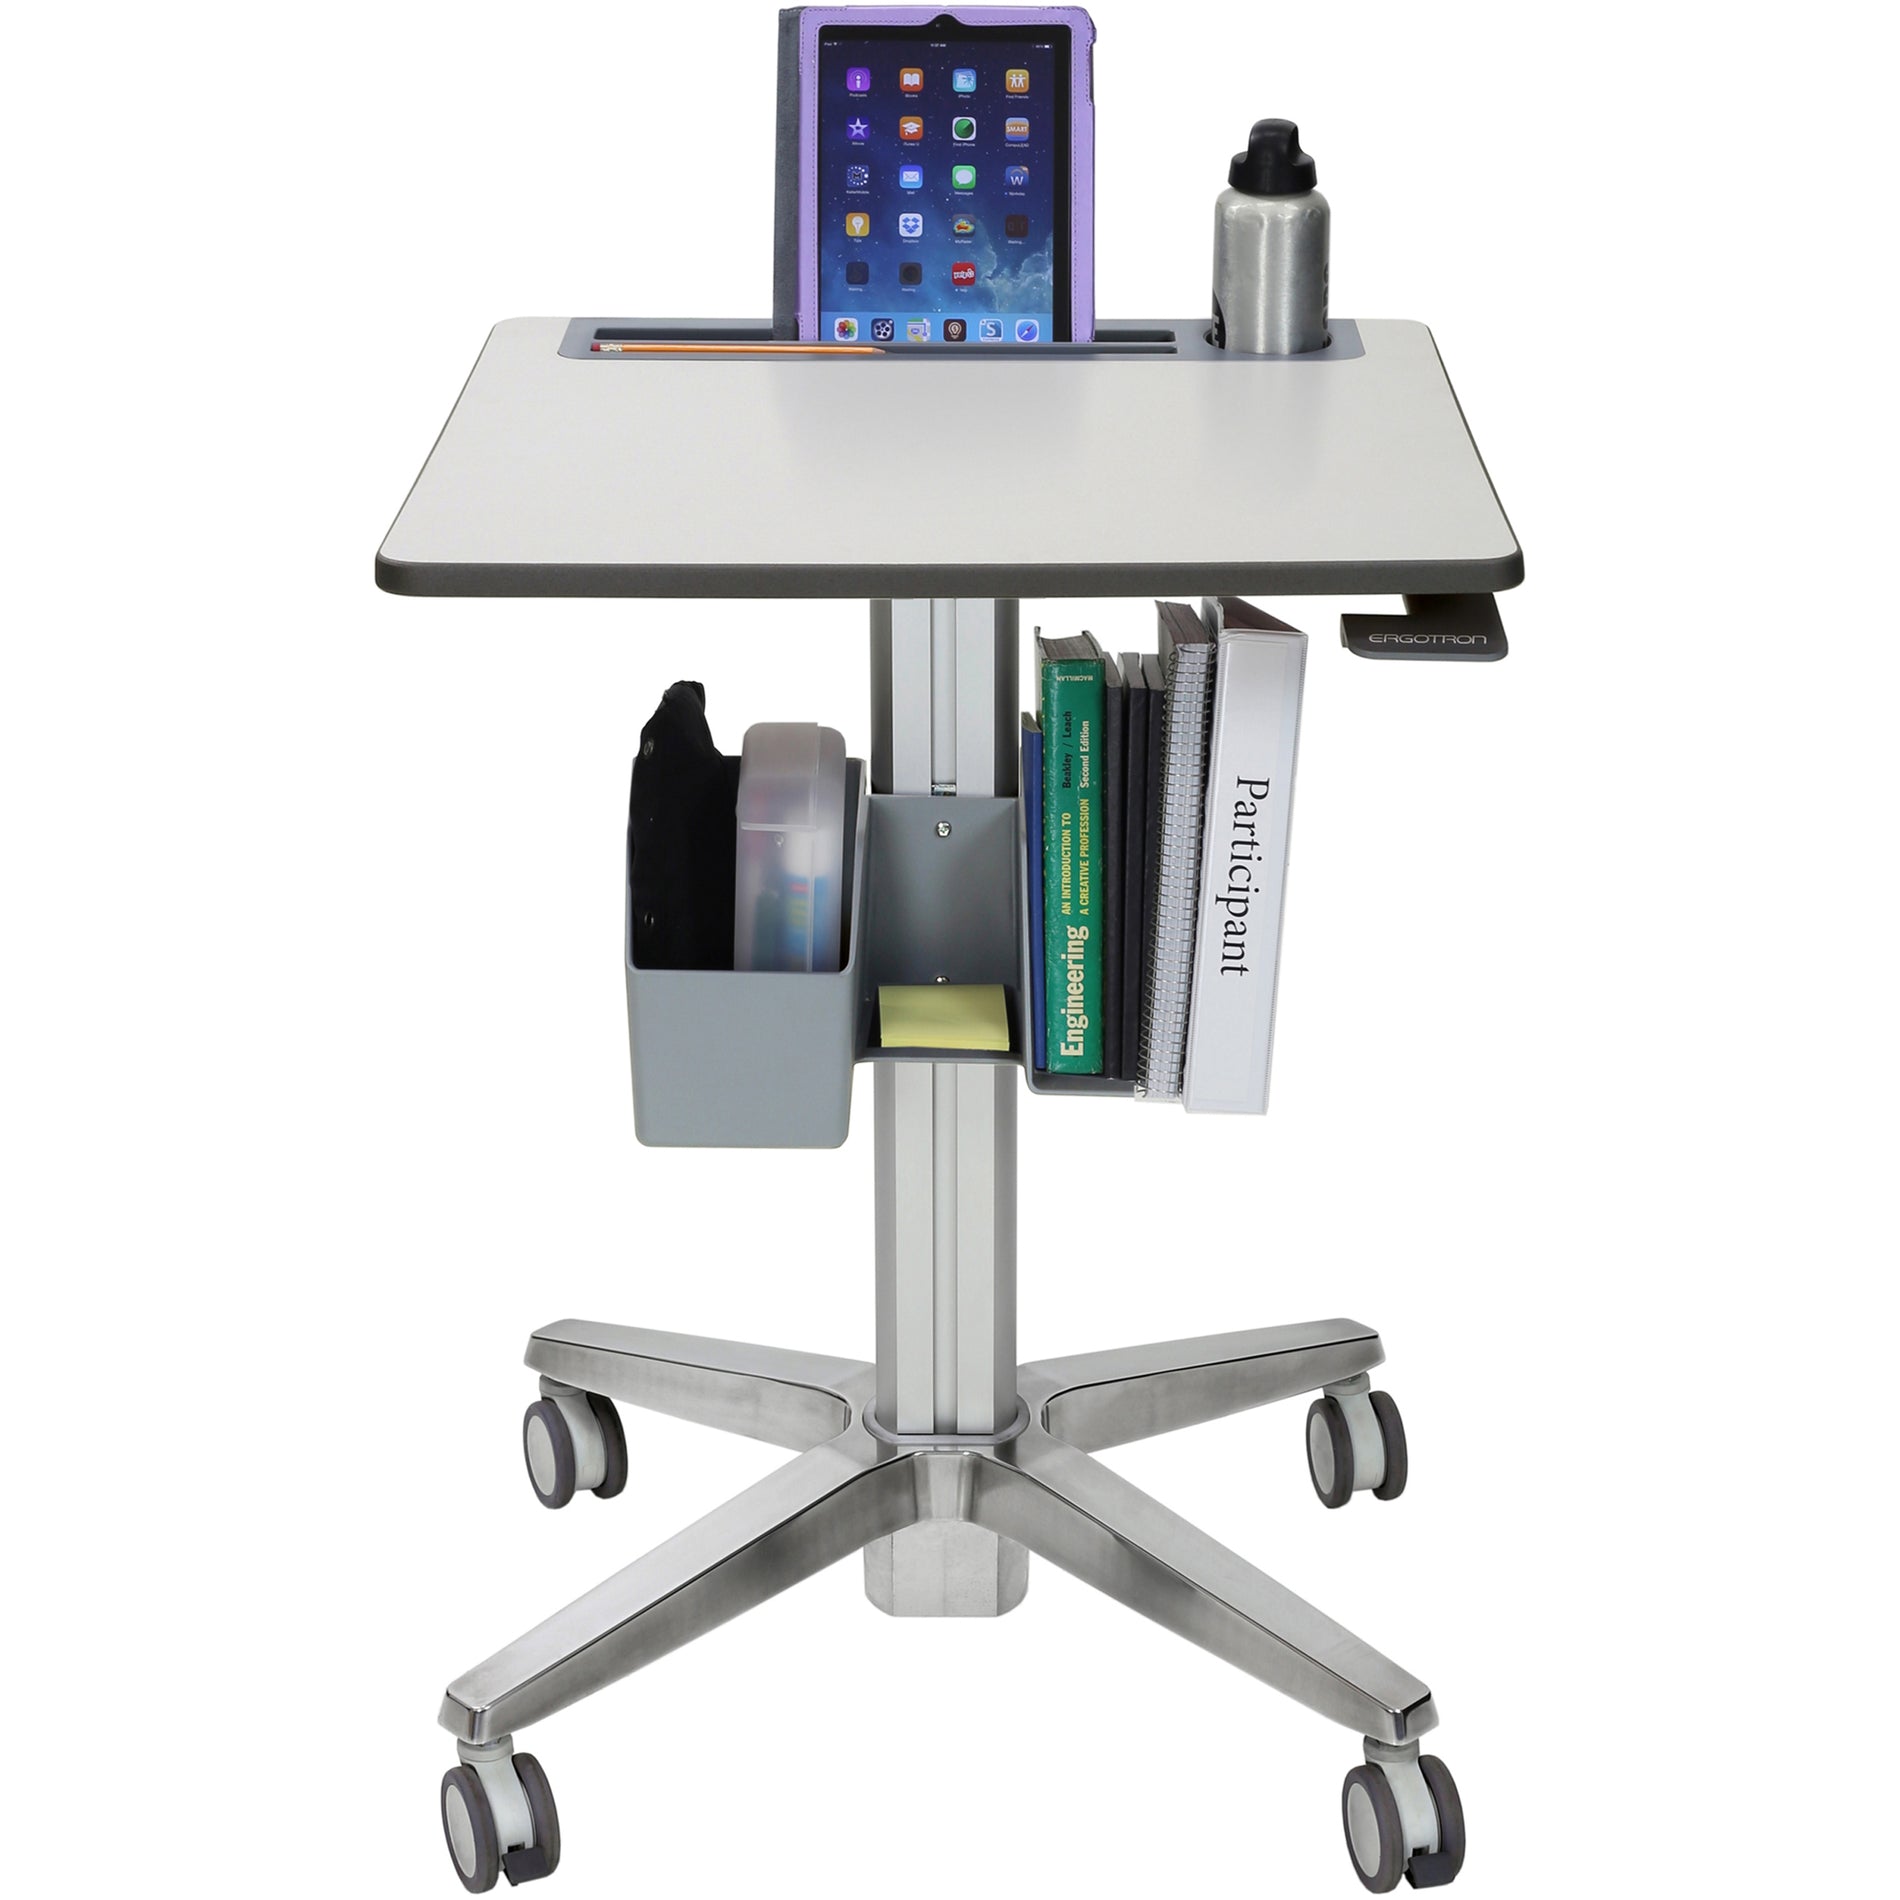 Ergotron 24-481-003 LearnFit Sit-Stand Desk, Tall - Adjustable-Height Base, Integrated Cupholder, Tablet Slot, Pencil Tray, Backpack Hook, Locking Casters